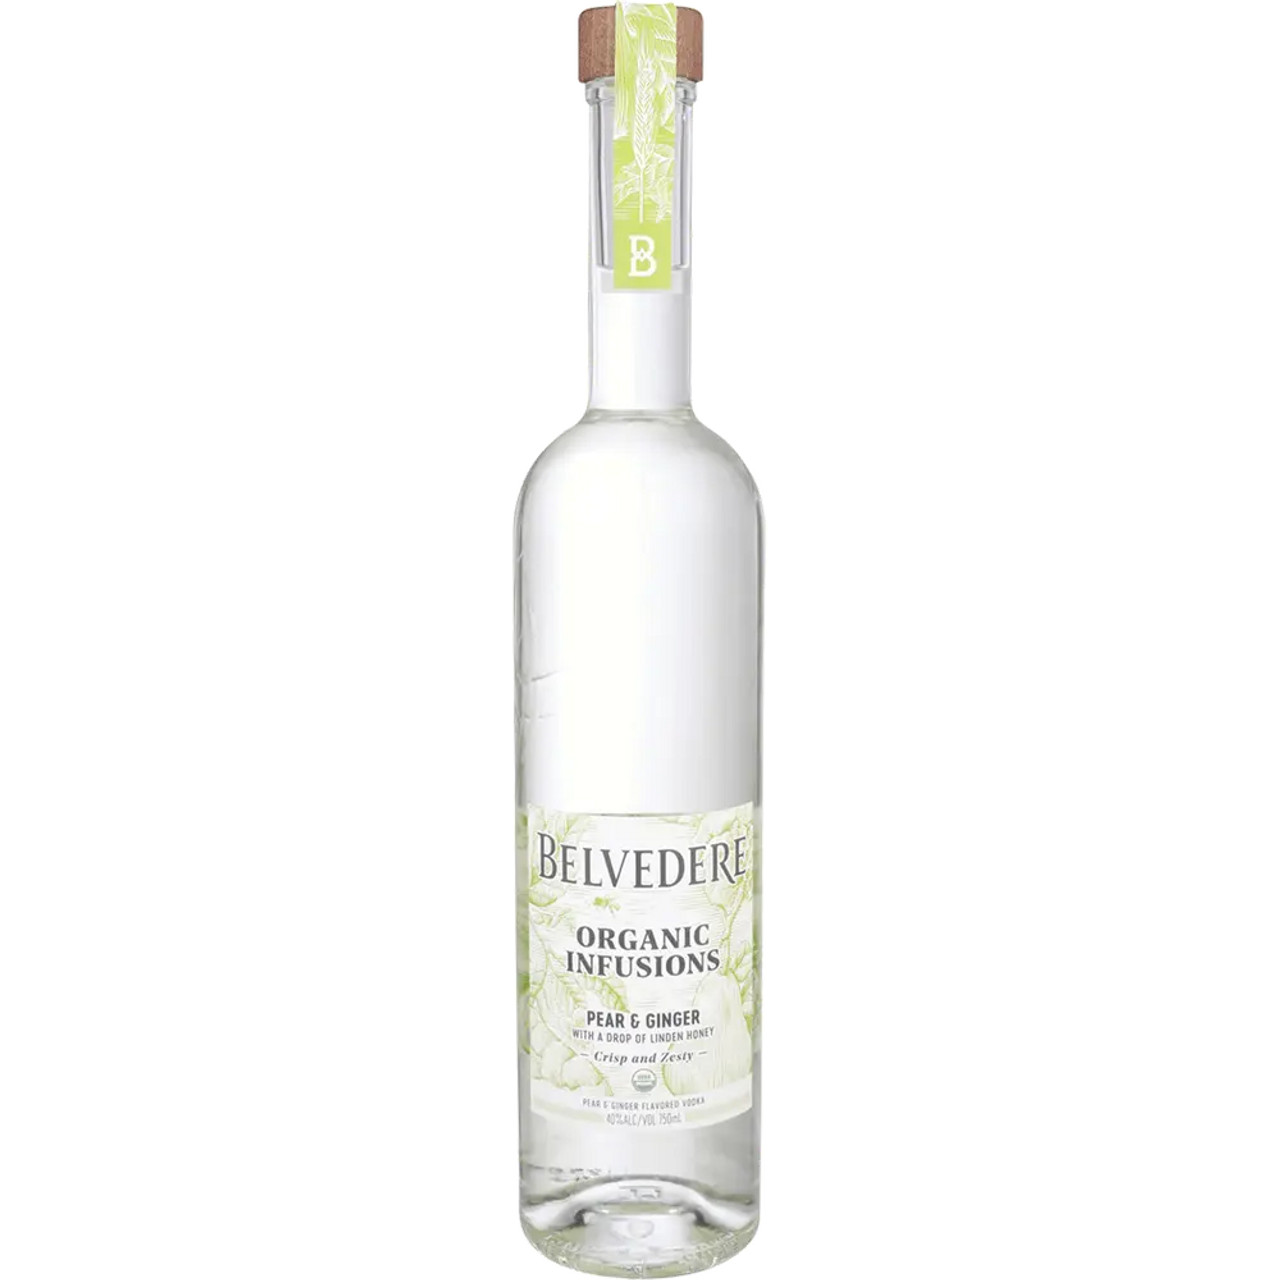 Belvedere Organic Infusions Pear & Ginger Vodka 750 ML